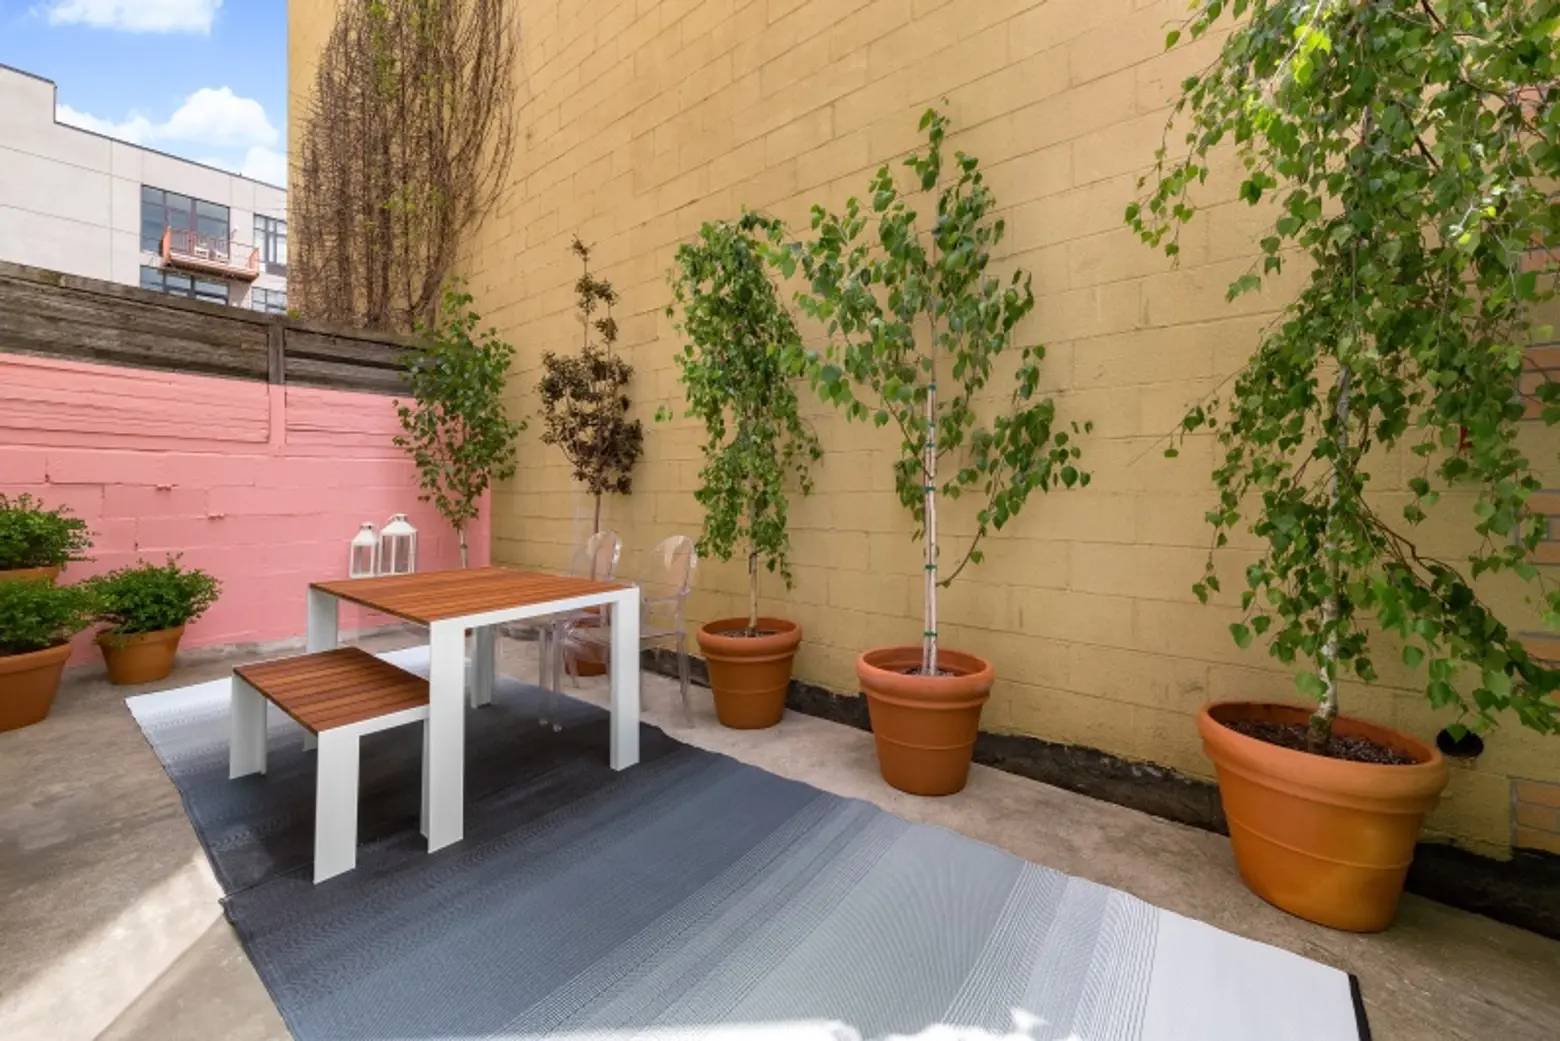 267 Berry Street, Cool listings, Williamsburg, townhouse, interiors